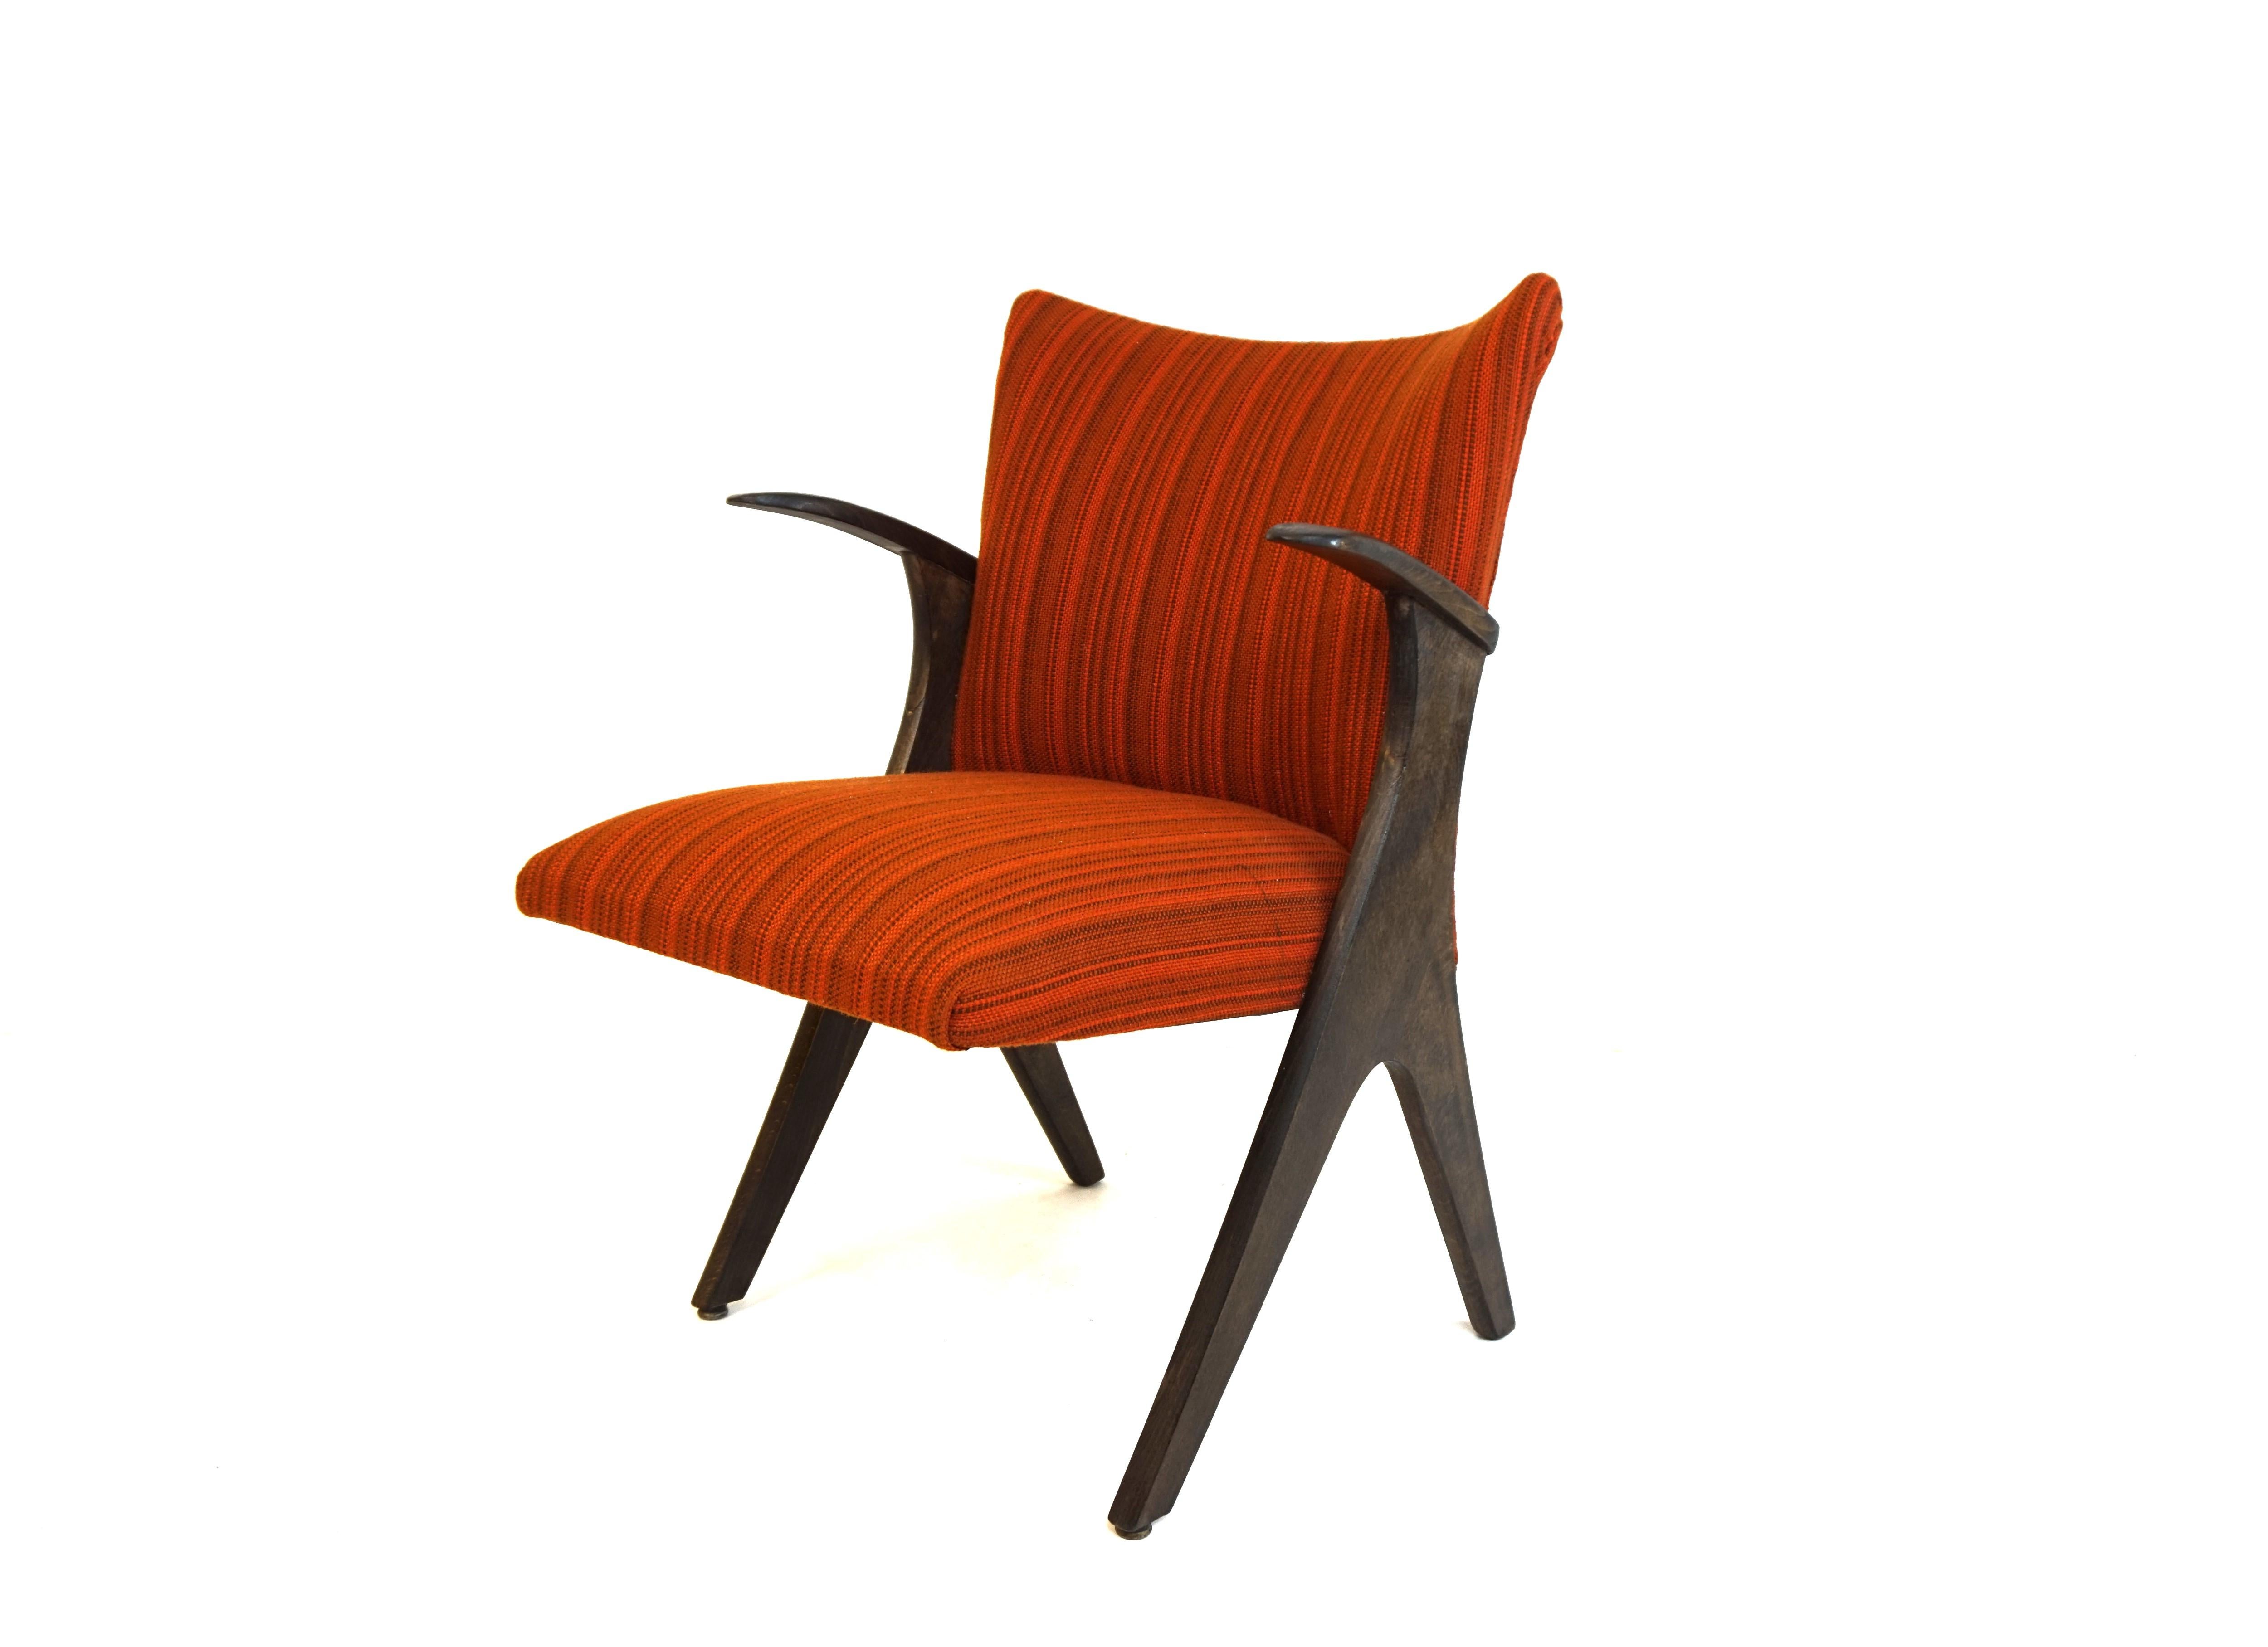 Casala Penguin Chair by Carl Sasse In Good Condition For Sale In Ludwigslust, DE